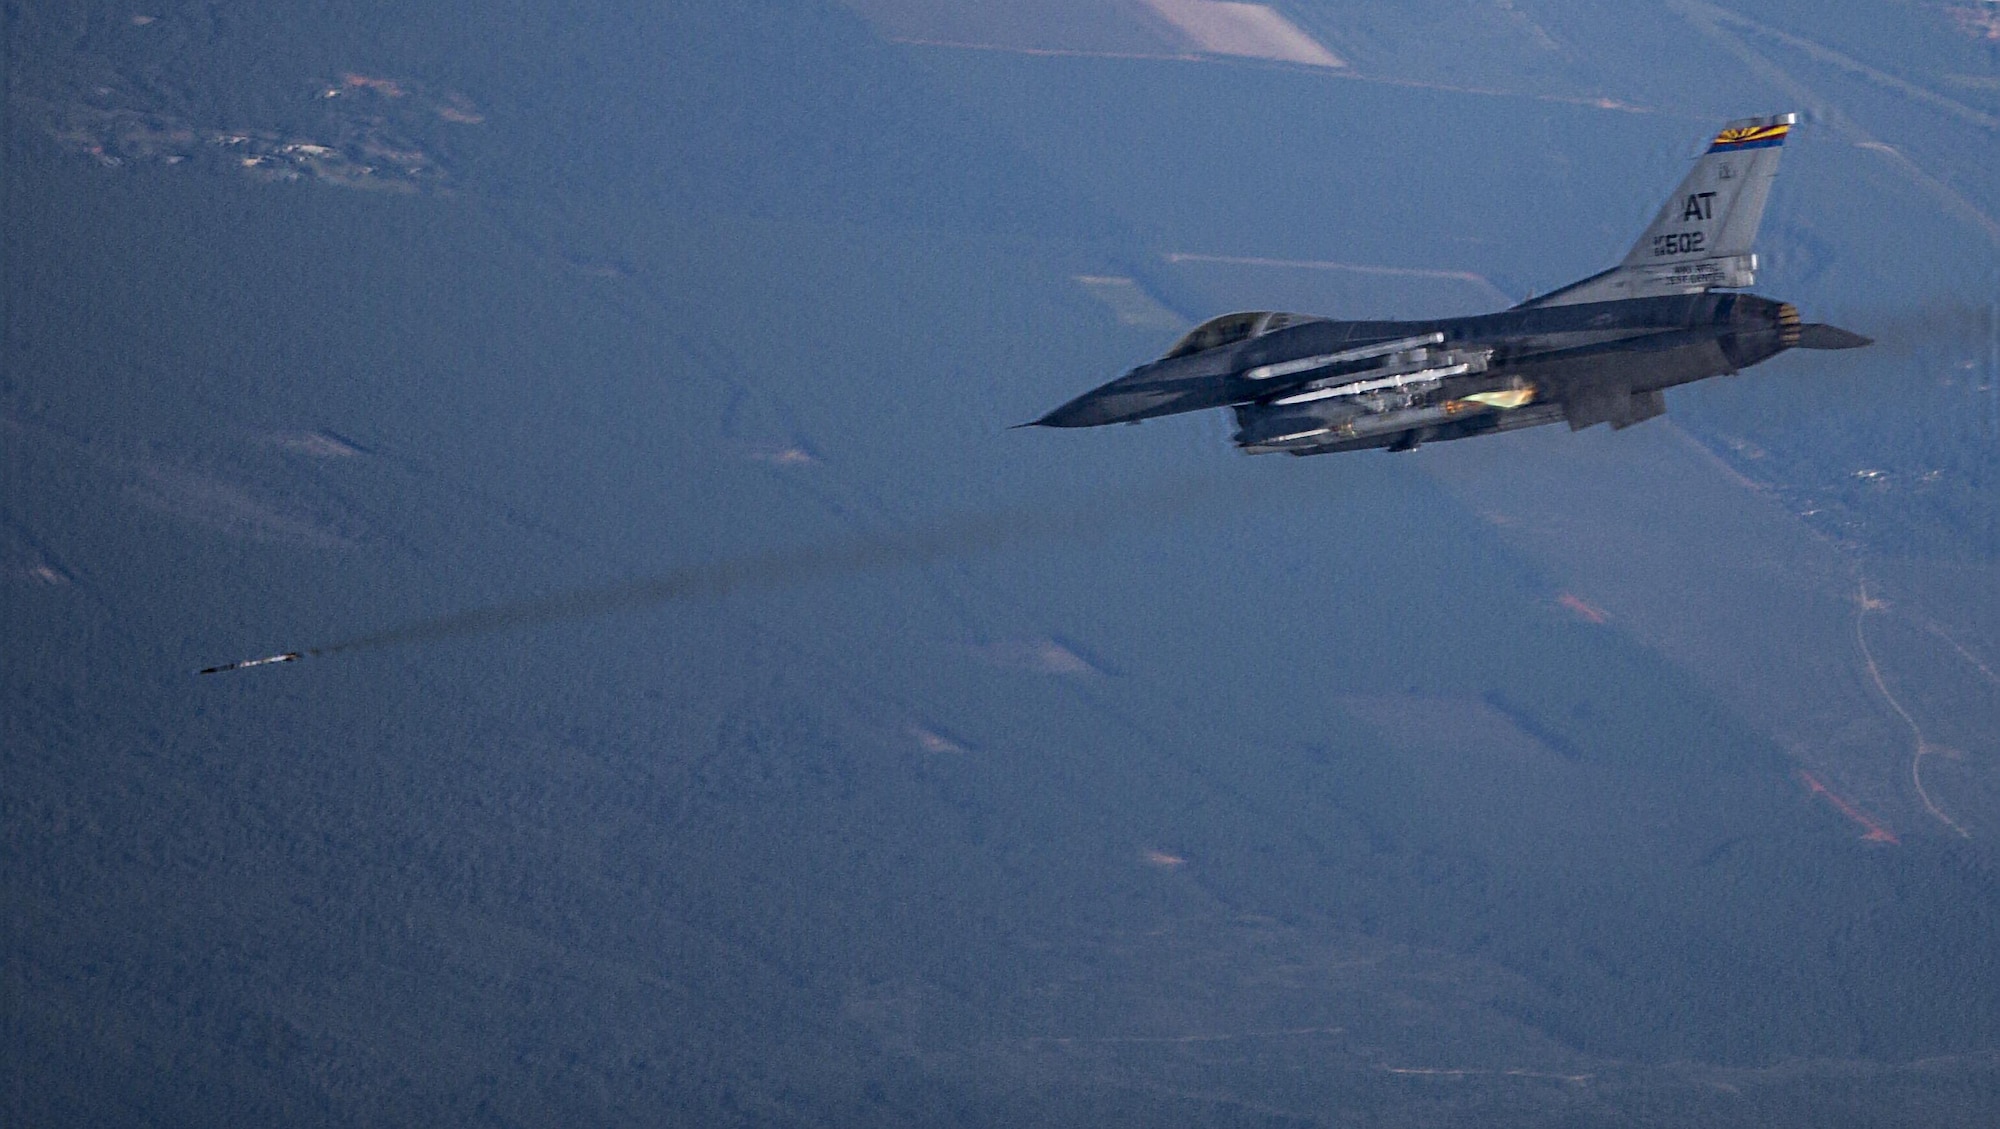 An F-16 pilot from the Arizona Air National Guard Air Reserve Test Center fires an Advanced Precision Kill Weapon System II integrated M151 warhead during a test mission over the Eglin Air Force Base range in July. The system turns existing Hydra 70 unguided rockets into precision guided munitions through the addition of a laser guidance kit. The Arizona Air National Guard Air Reserve Test Center worked with the 96th Test Wing community on the tests. (Courtesy Photo)